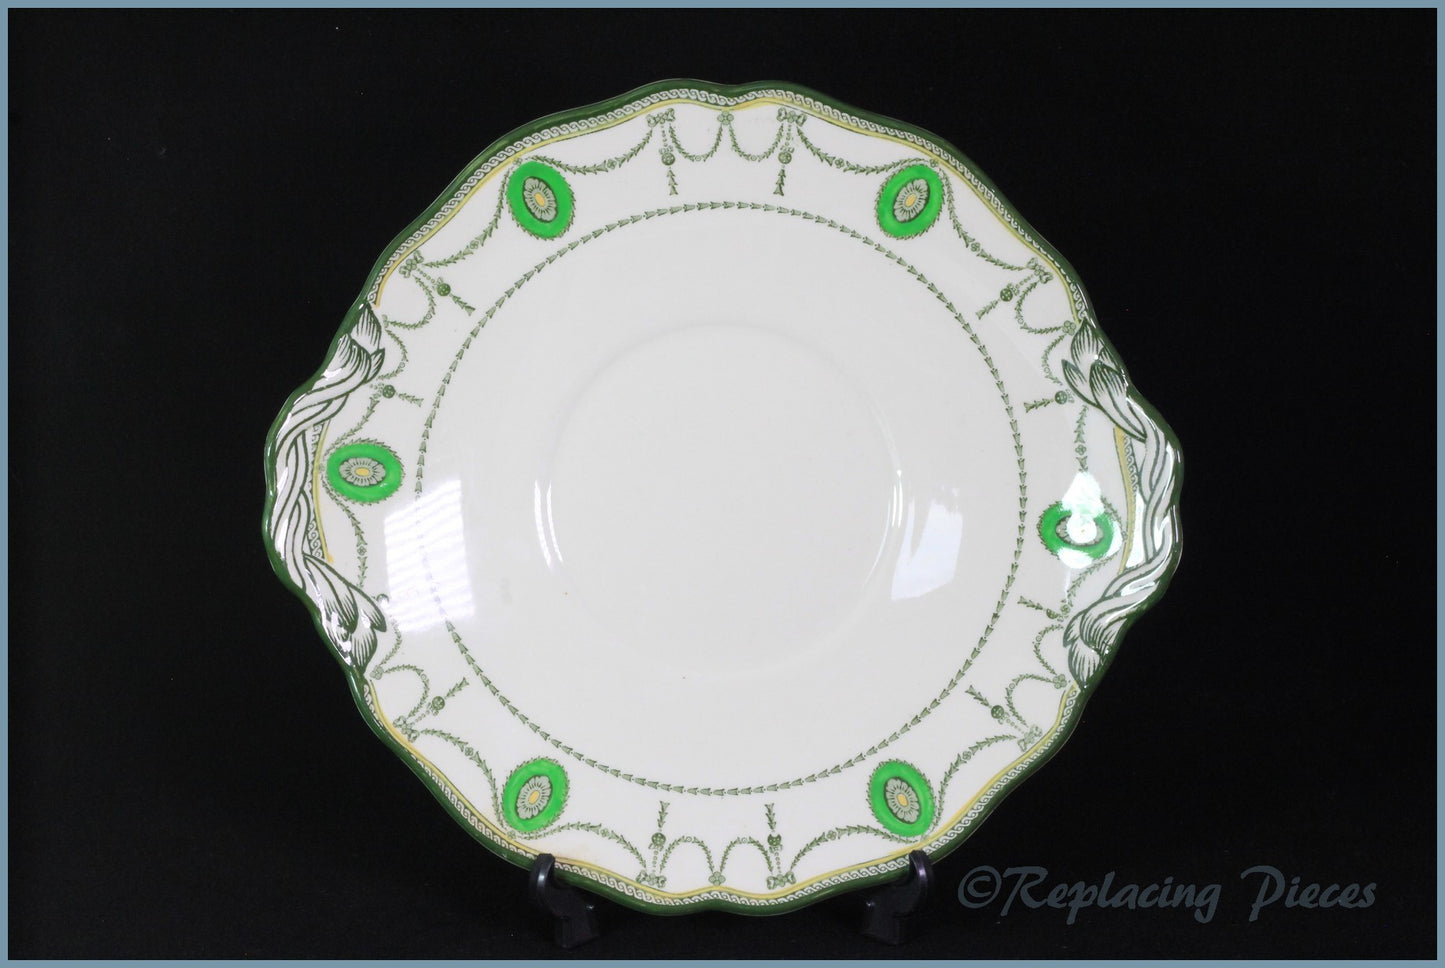 Royal Doulton - Countess - Bread & Butter Serving Plate